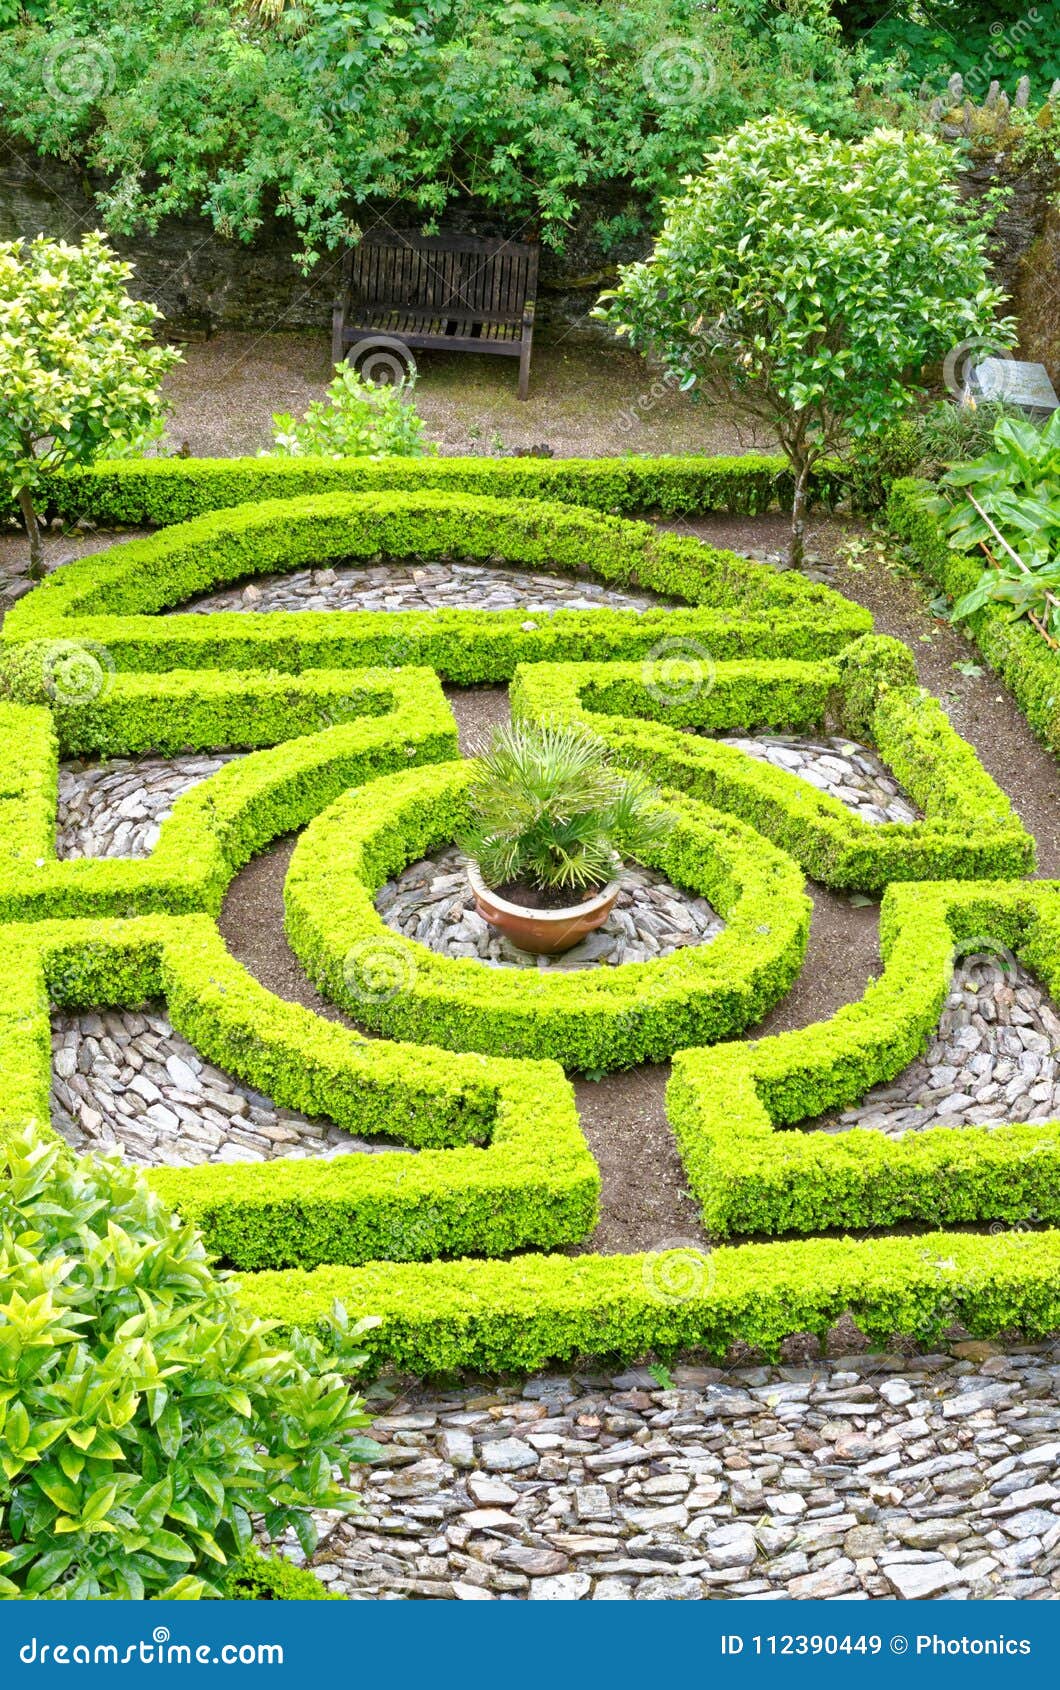 formal garden and small maze stock image - image of hedge